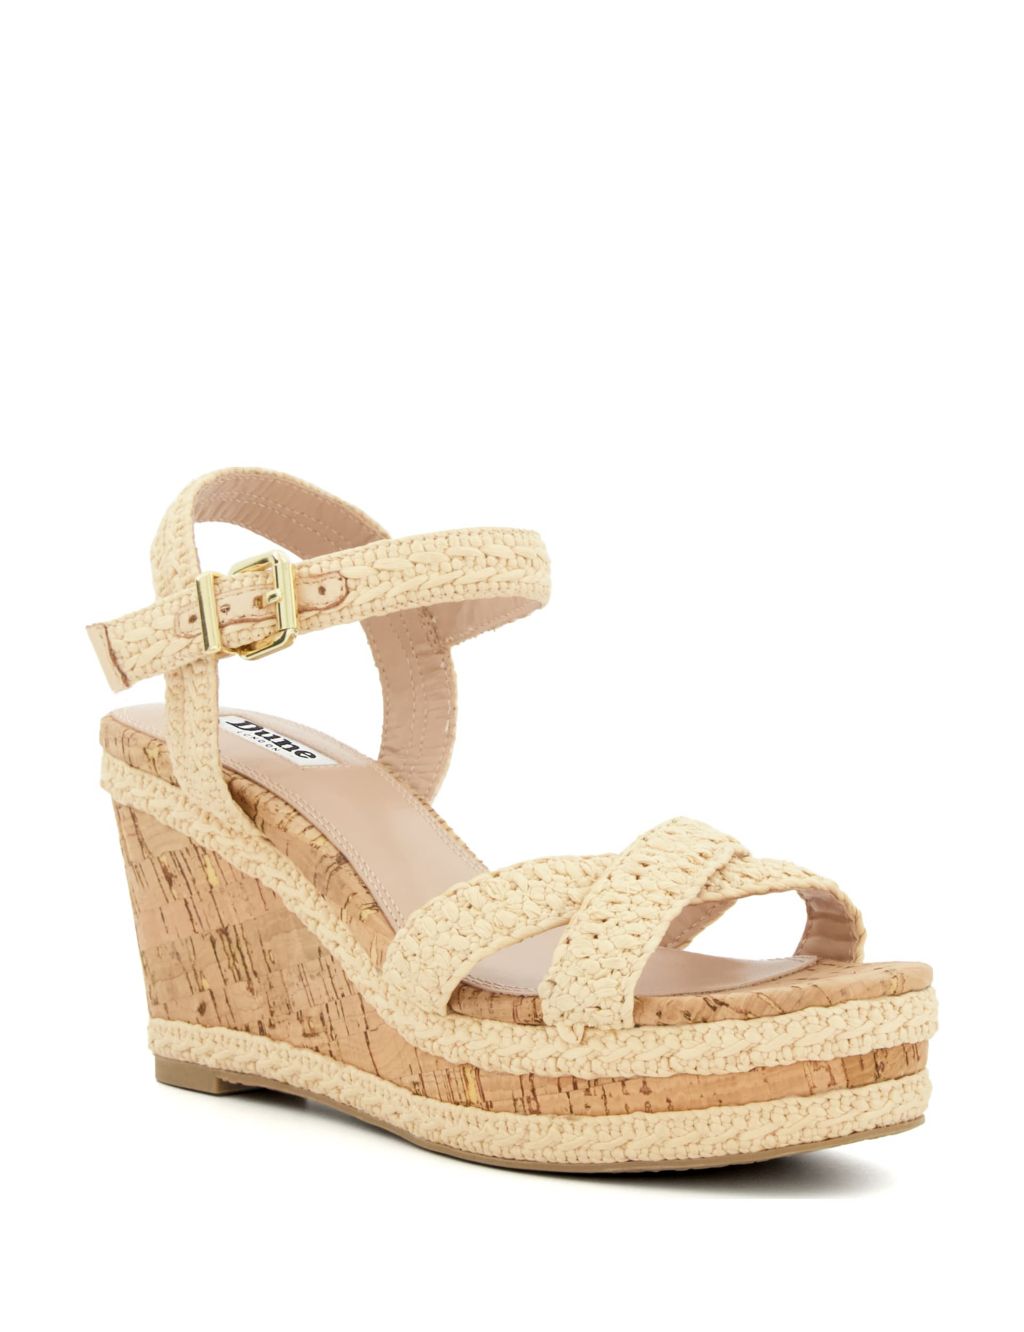 Woven Crossover Ankle Strap Wedge Sandals | Dune London | M&S